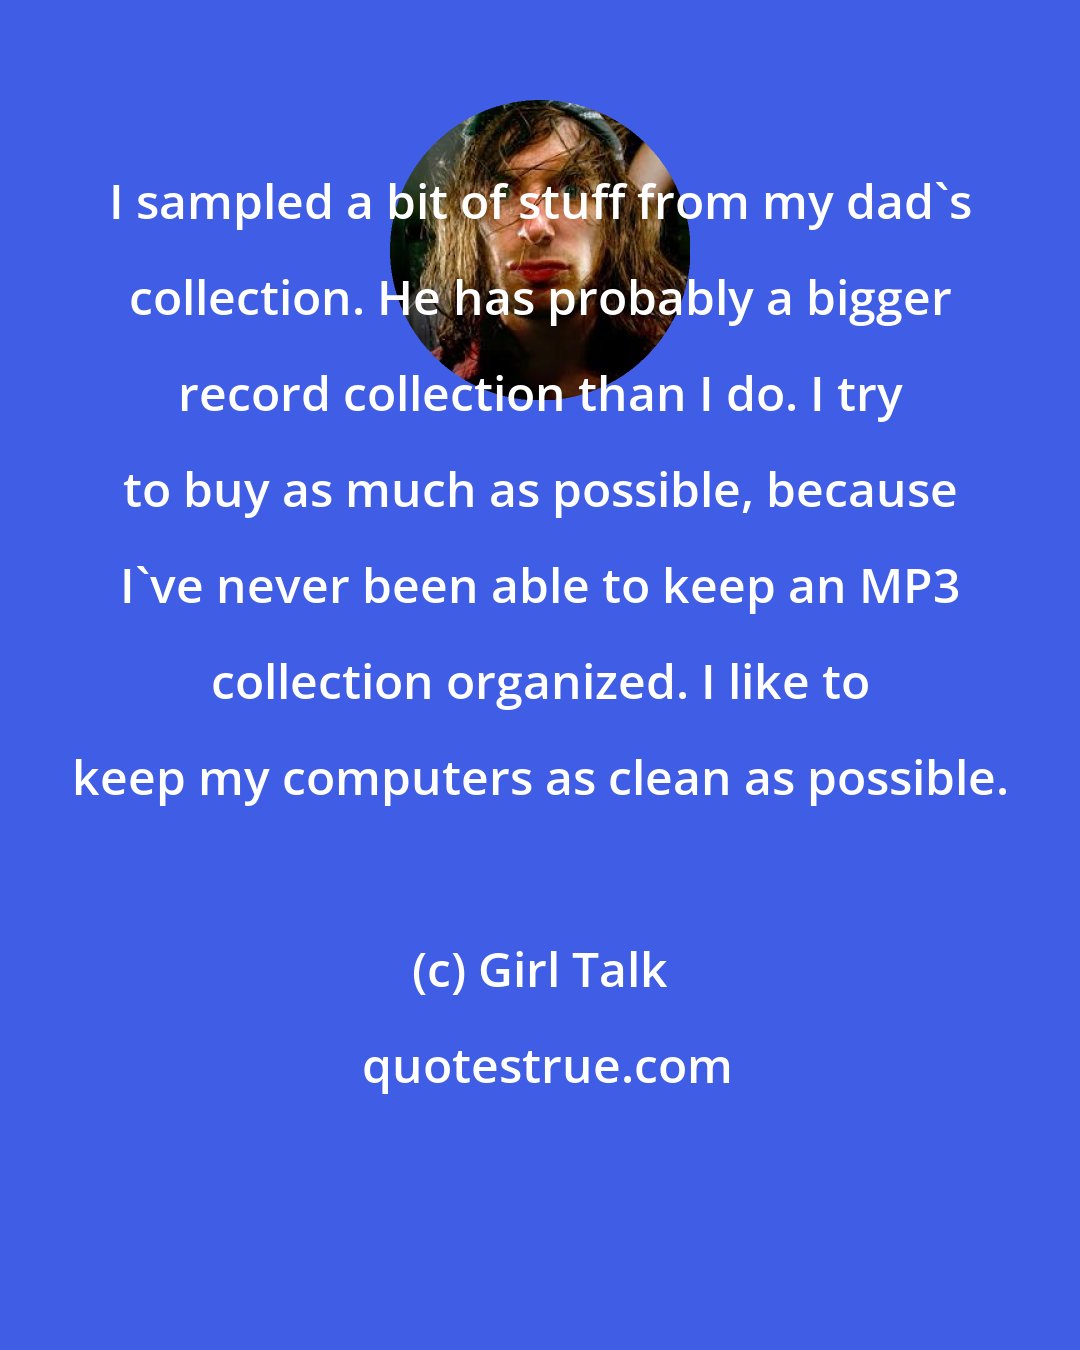 Girl Talk: I sampled a bit of stuff from my dad's collection. He has probably a bigger record collection than I do. I try to buy as much as possible, because I've never been able to keep an MP3 collection organized. I like to keep my computers as clean as possible.